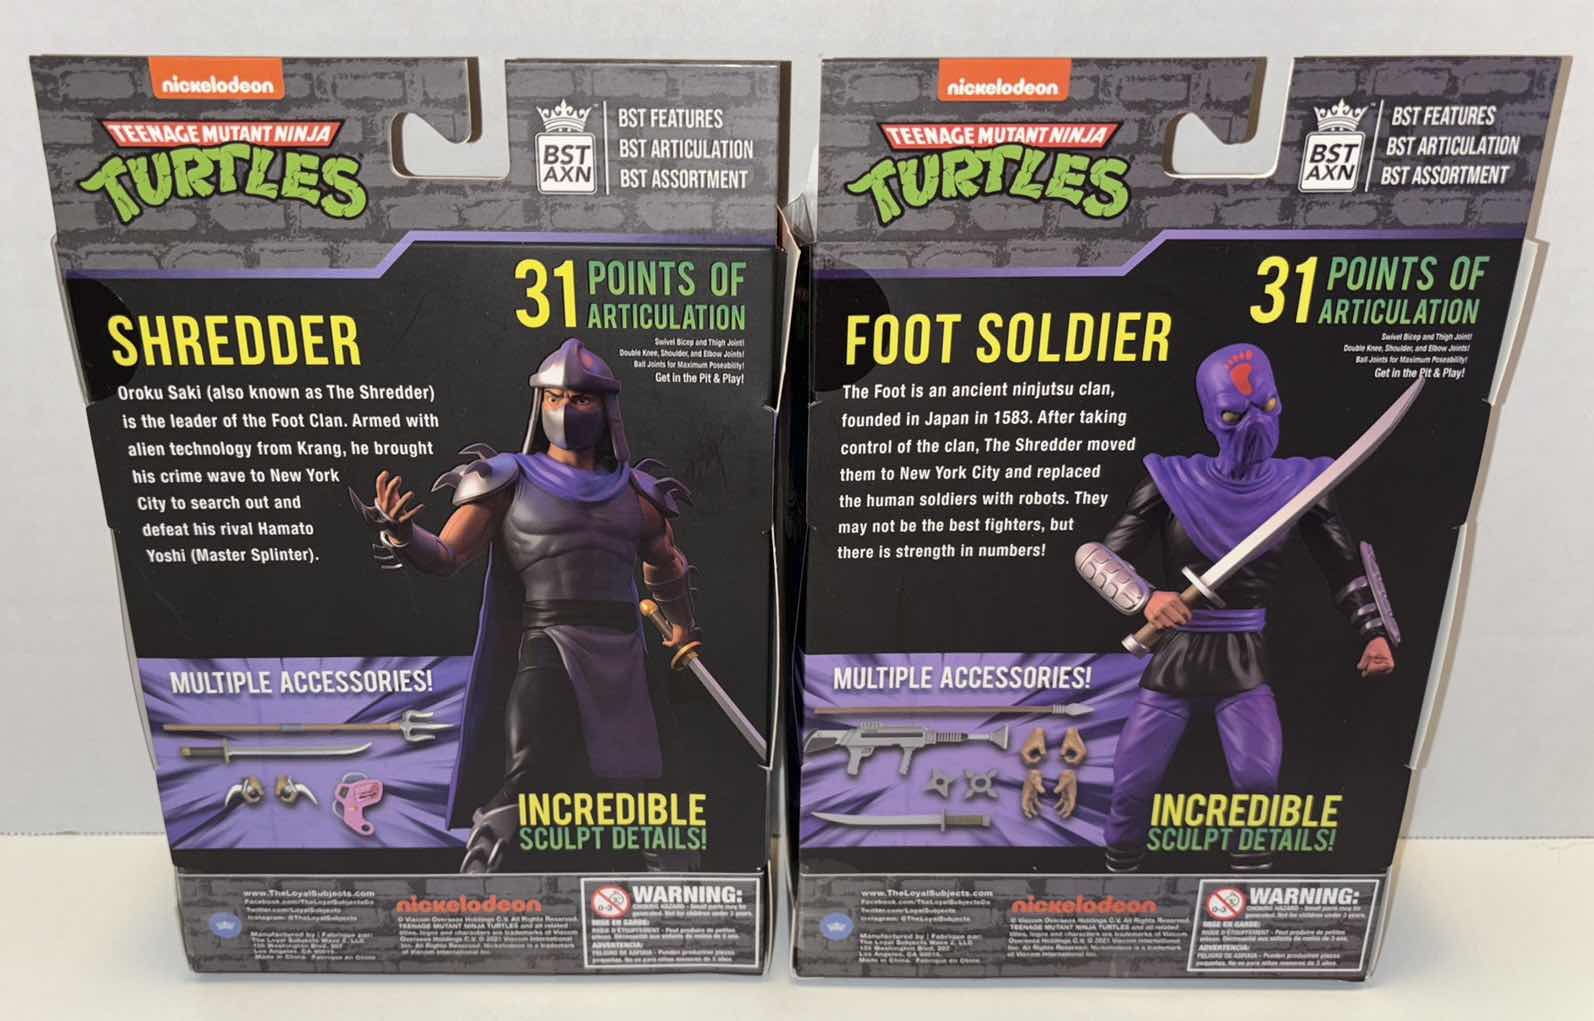 Photo 3 of NEW LOYAL SUBJECTS BST AXN TEENAGE MUTANT NINJA TURTLES ACTION FIGURE & ACCESSORIES 2-PACK, “SHREDDER” & “FOOT SOLDIER”